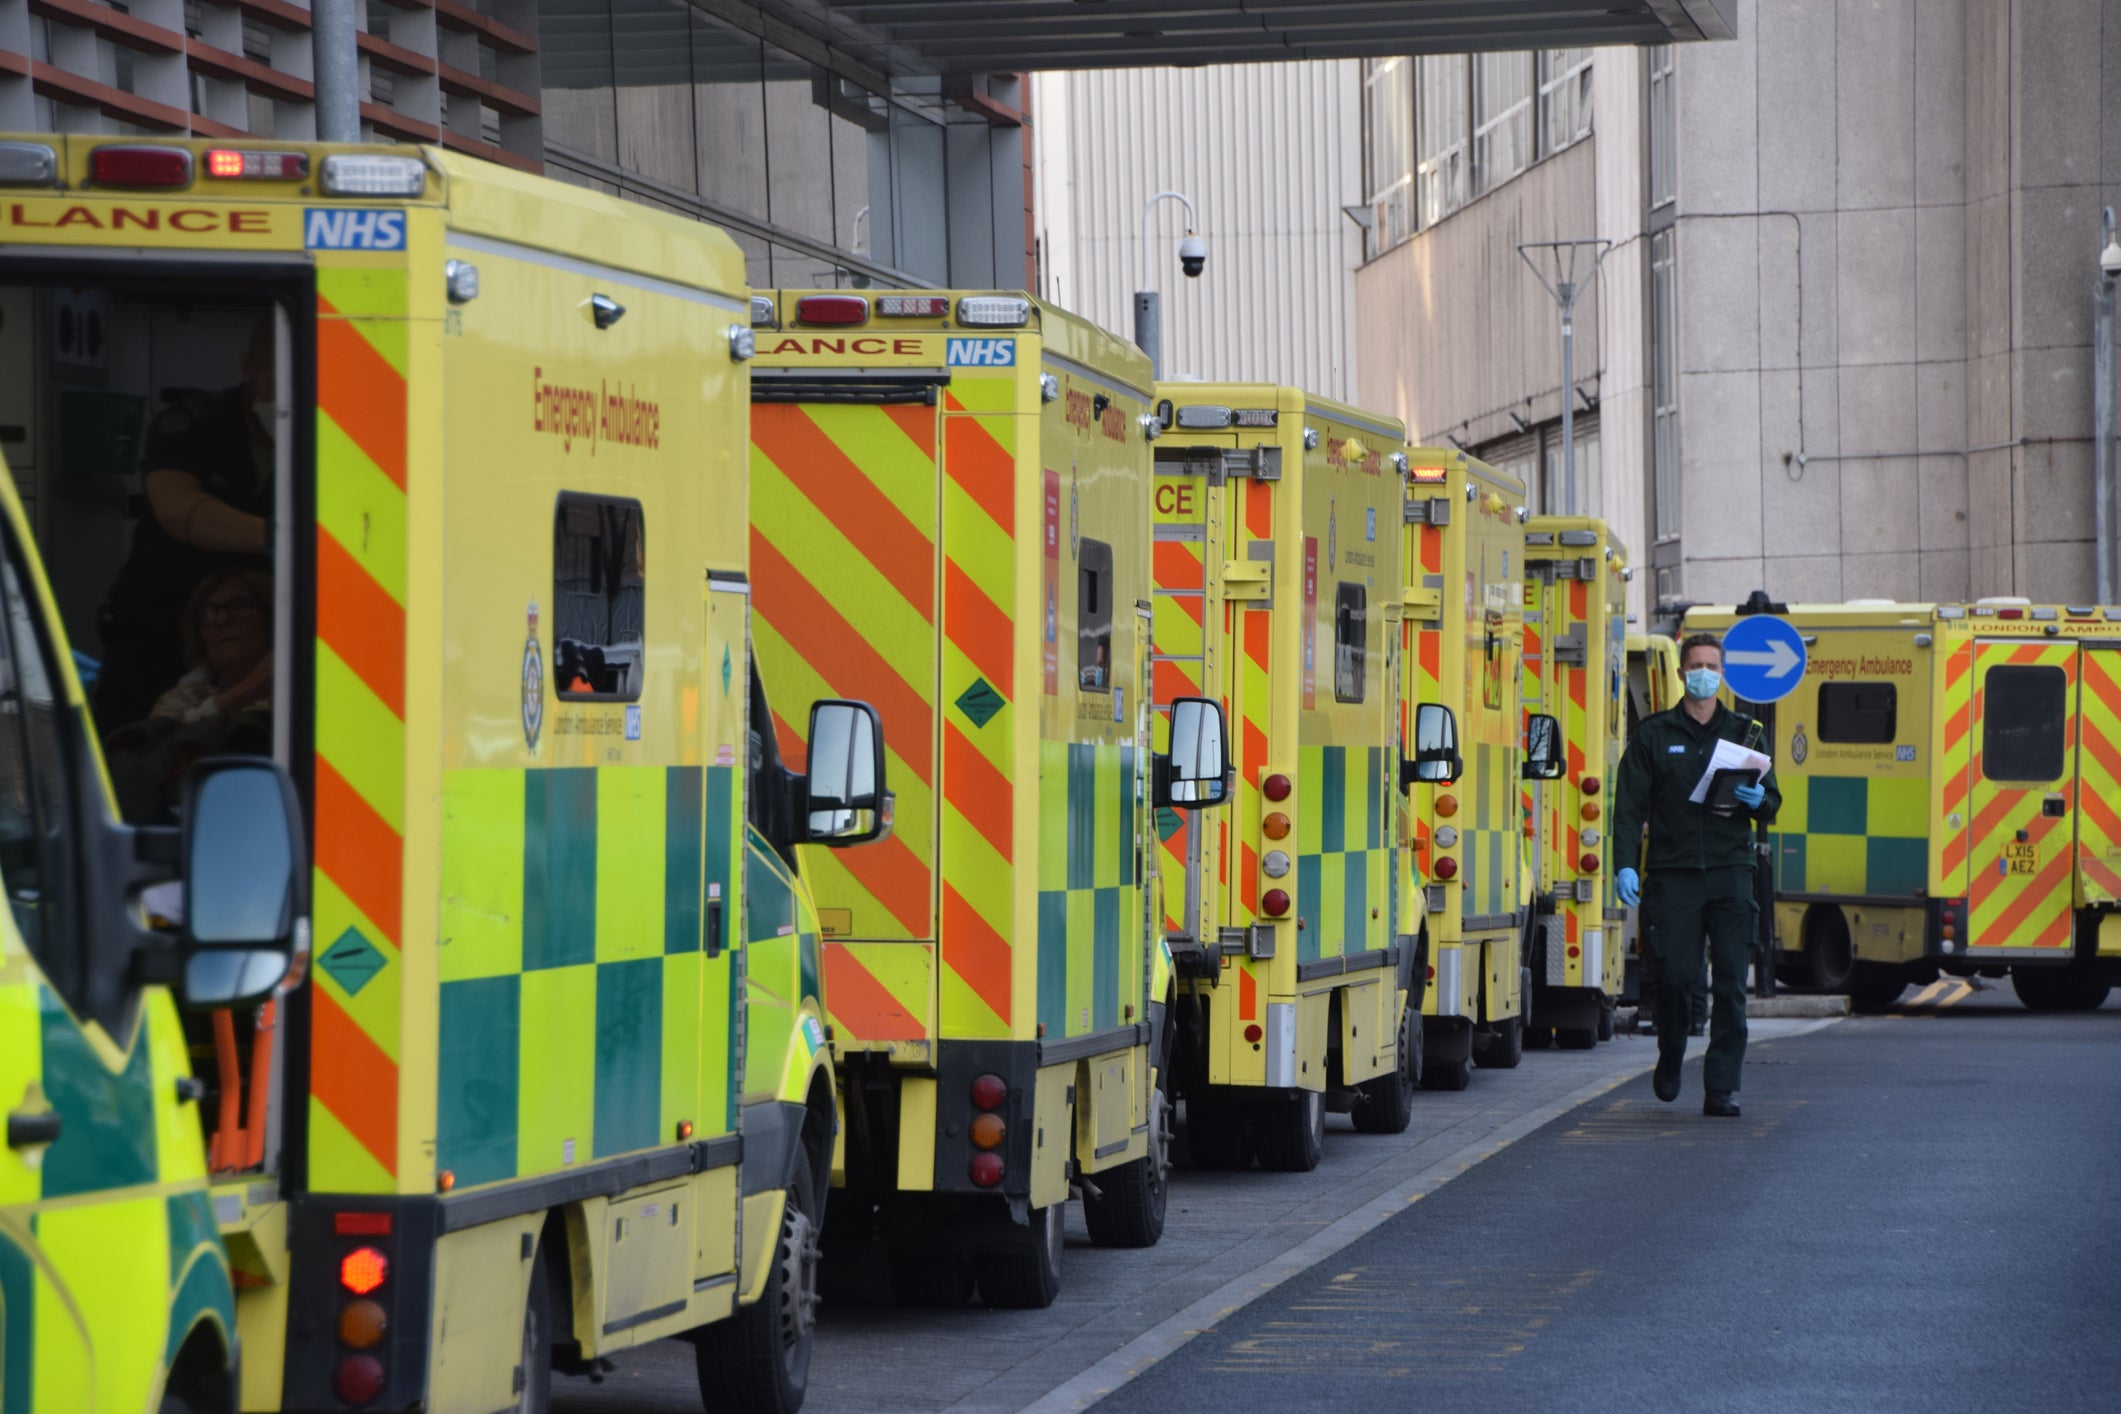 Ambulances queue outside the Royal London Hospital in London in January